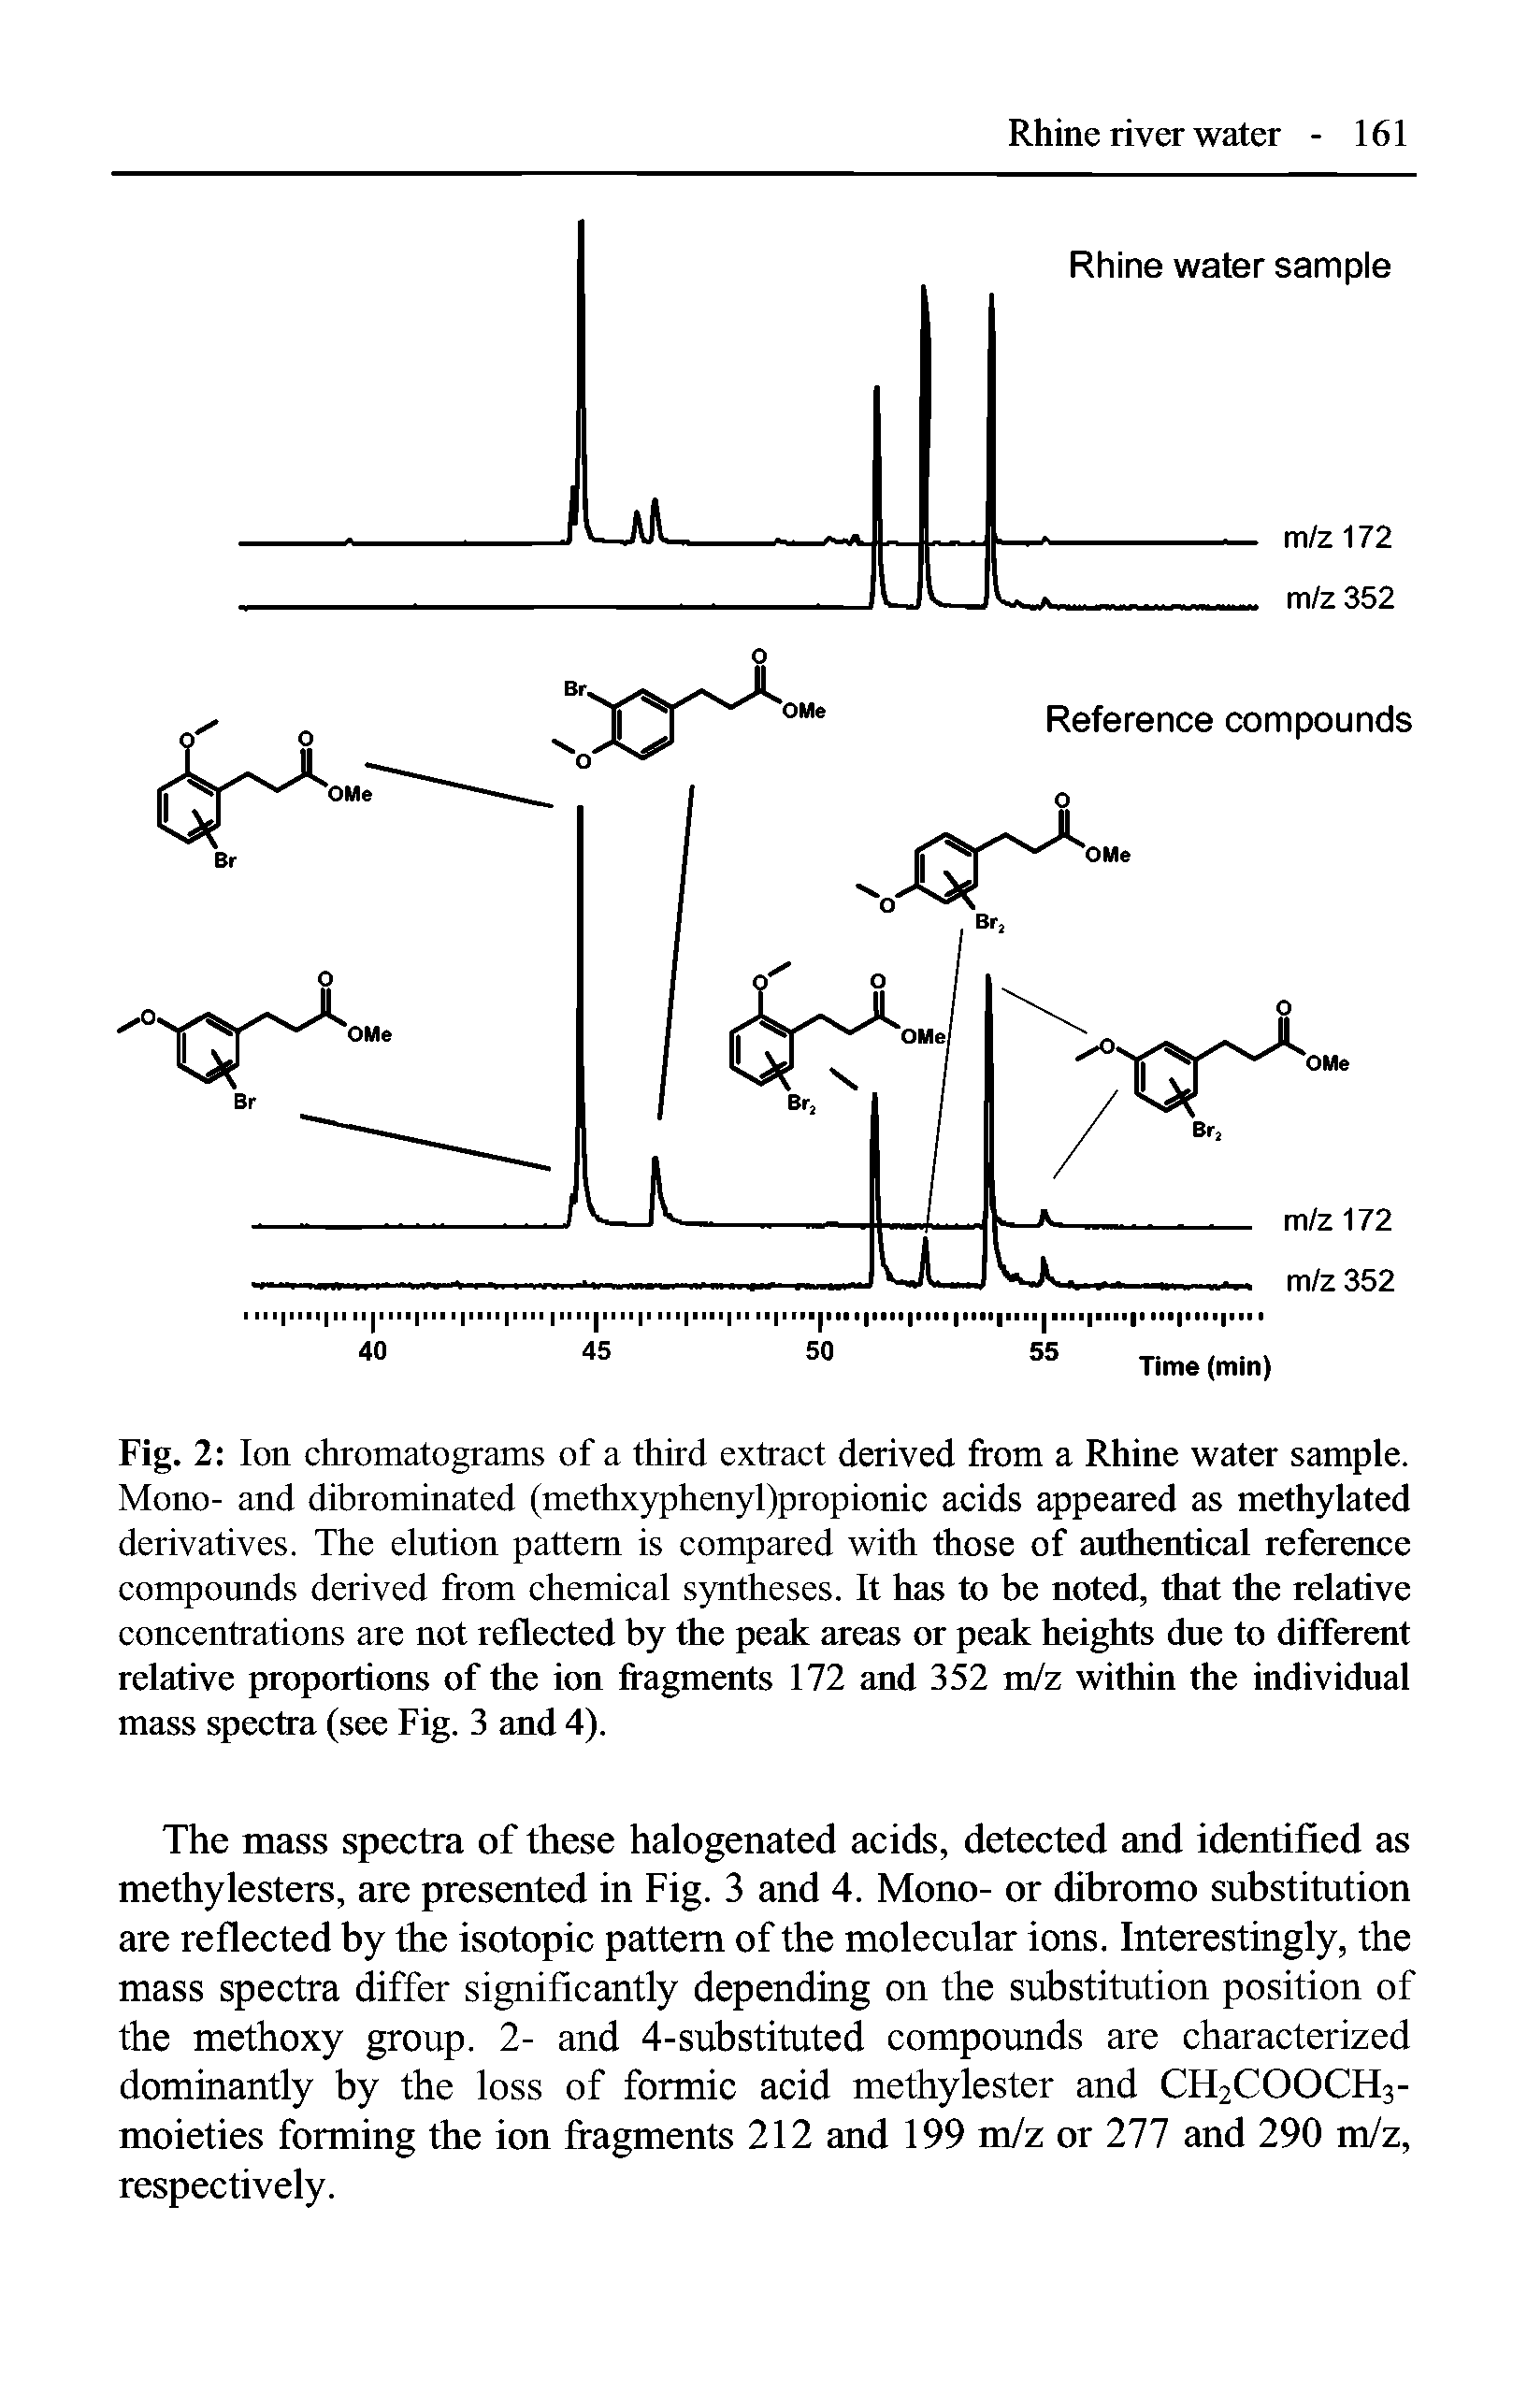 Fig. 2 Ion chromatograms of a third extract derived from a Rhine water sample. Mono- and dibrominated (methxyphenyl)propionic acids appeared as methylated derivatives. The elution pattern is compared with those of authentical reference compounds derived from chemical syntheses. It has to be noted, that the relative concentrations are not reflected by the peak areas or peak heights due to different relative proportions of the ion fragments 172 and 352 m/z within the individual mass spectra (see Fig. 3 and 4).